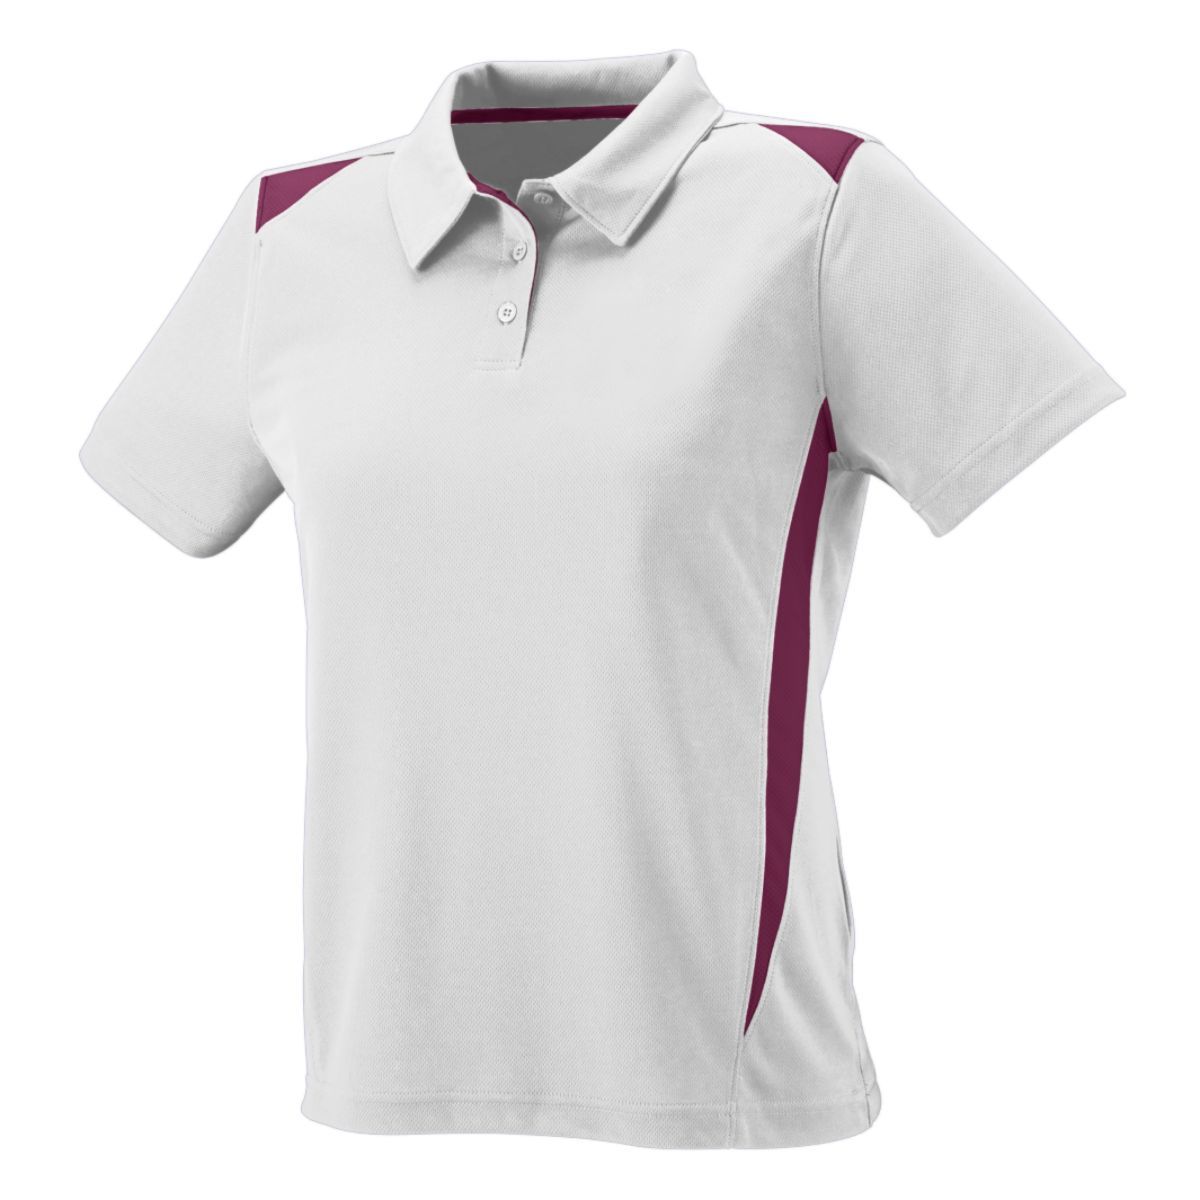 Augusta Sportswear Ladies Premier Polo in White/Maroon  -Part of the Ladies, Ladies-Polo, Polos, Augusta-Products, Shirts product lines at KanaleyCreations.com